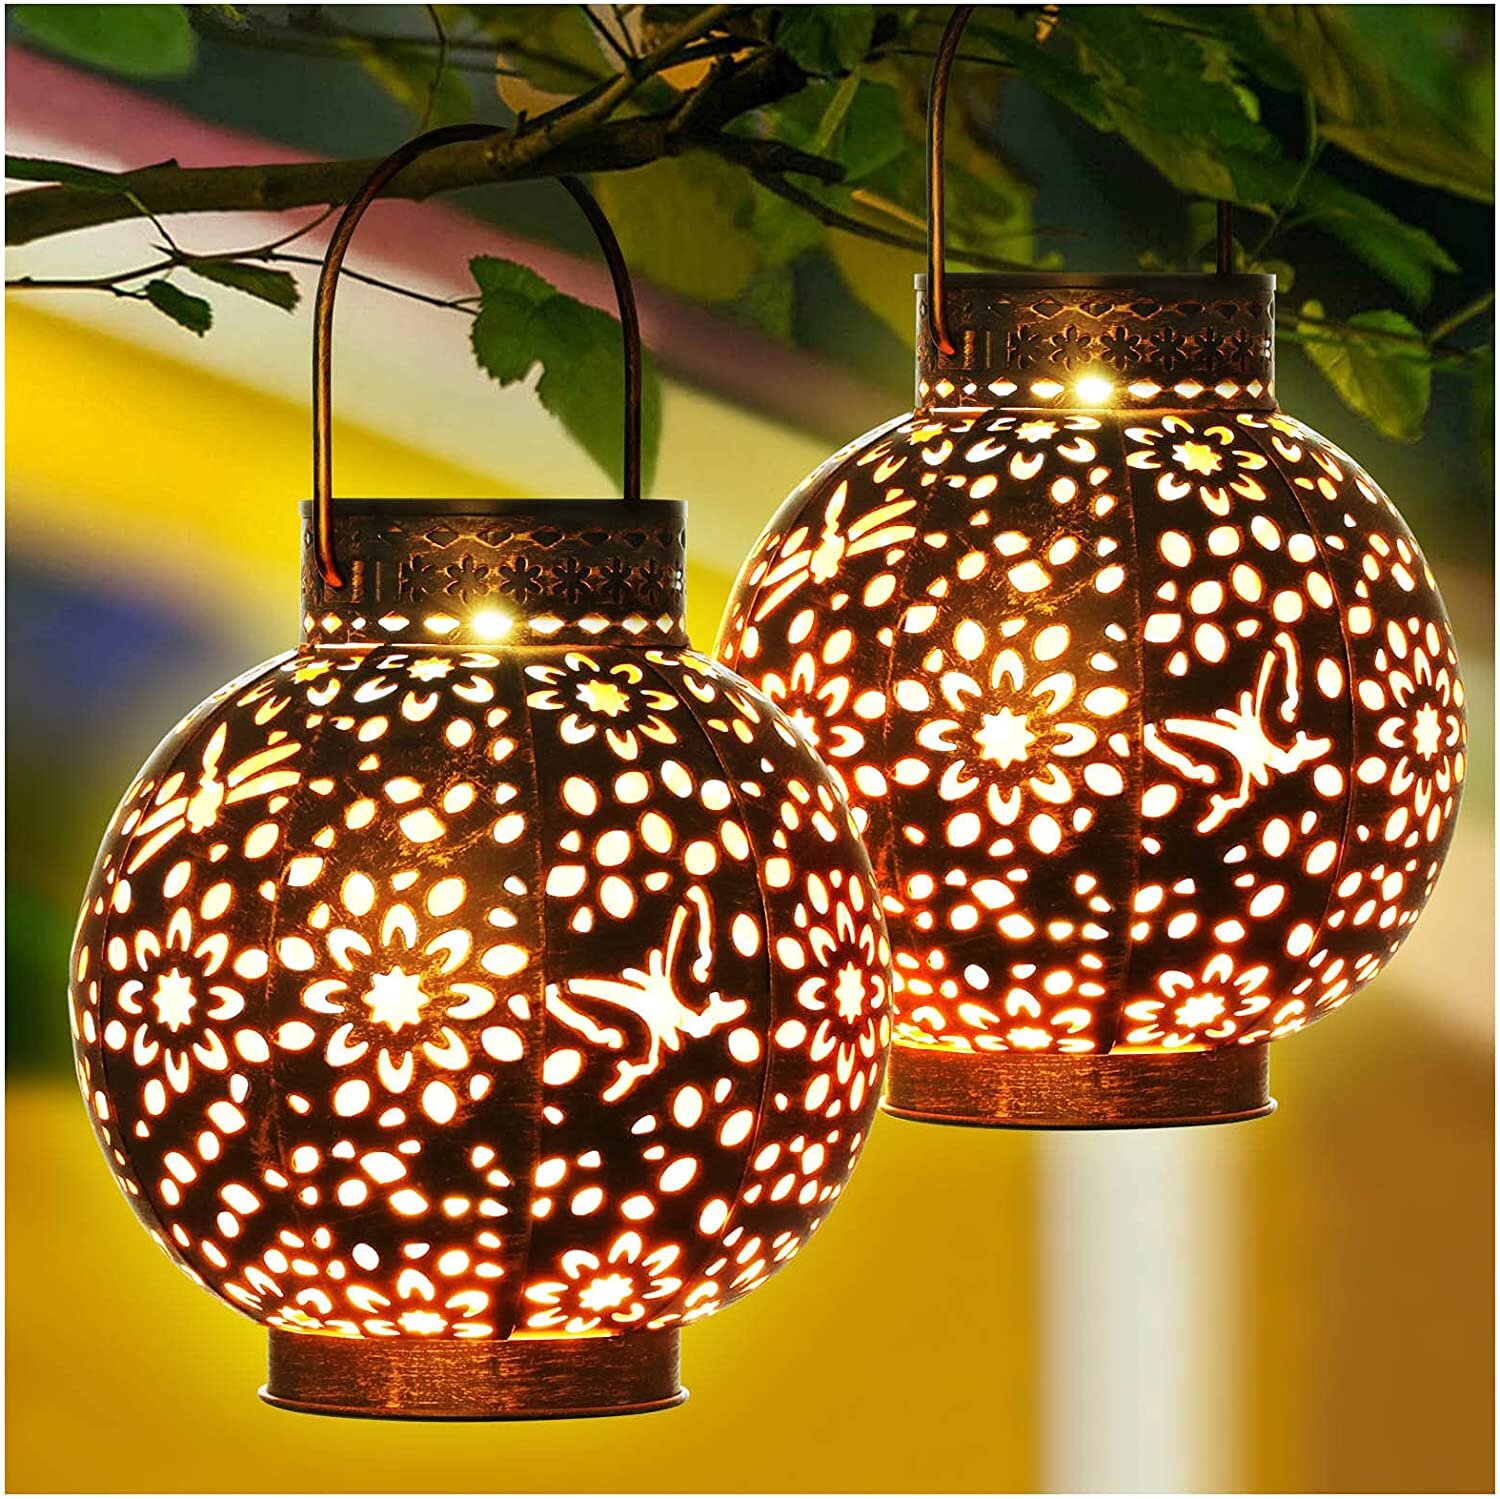 Lomelomme 3pcs Solar Power Chinese Lanterns Round Ball Shape Waterproof Outdoor LED Lantern Foldable Hanging Lantern Decorative for Home Garden Patio 